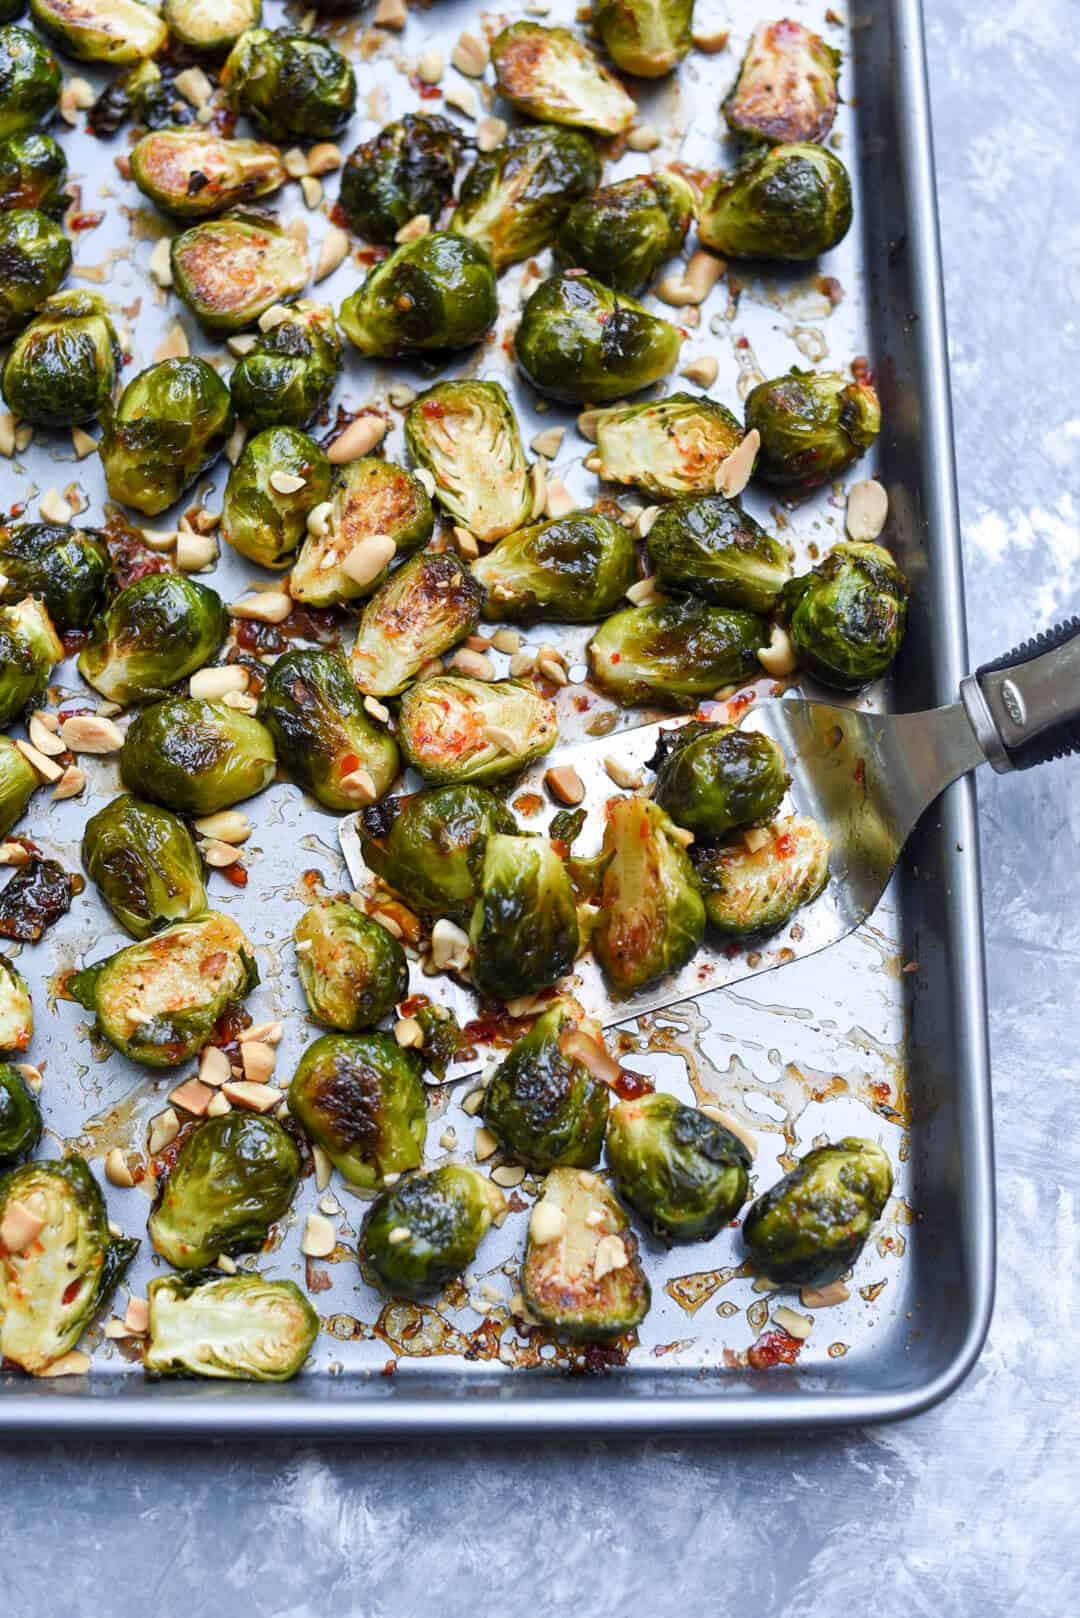 A spatula lifts some of the Brussels sprouts from the baking sheet.